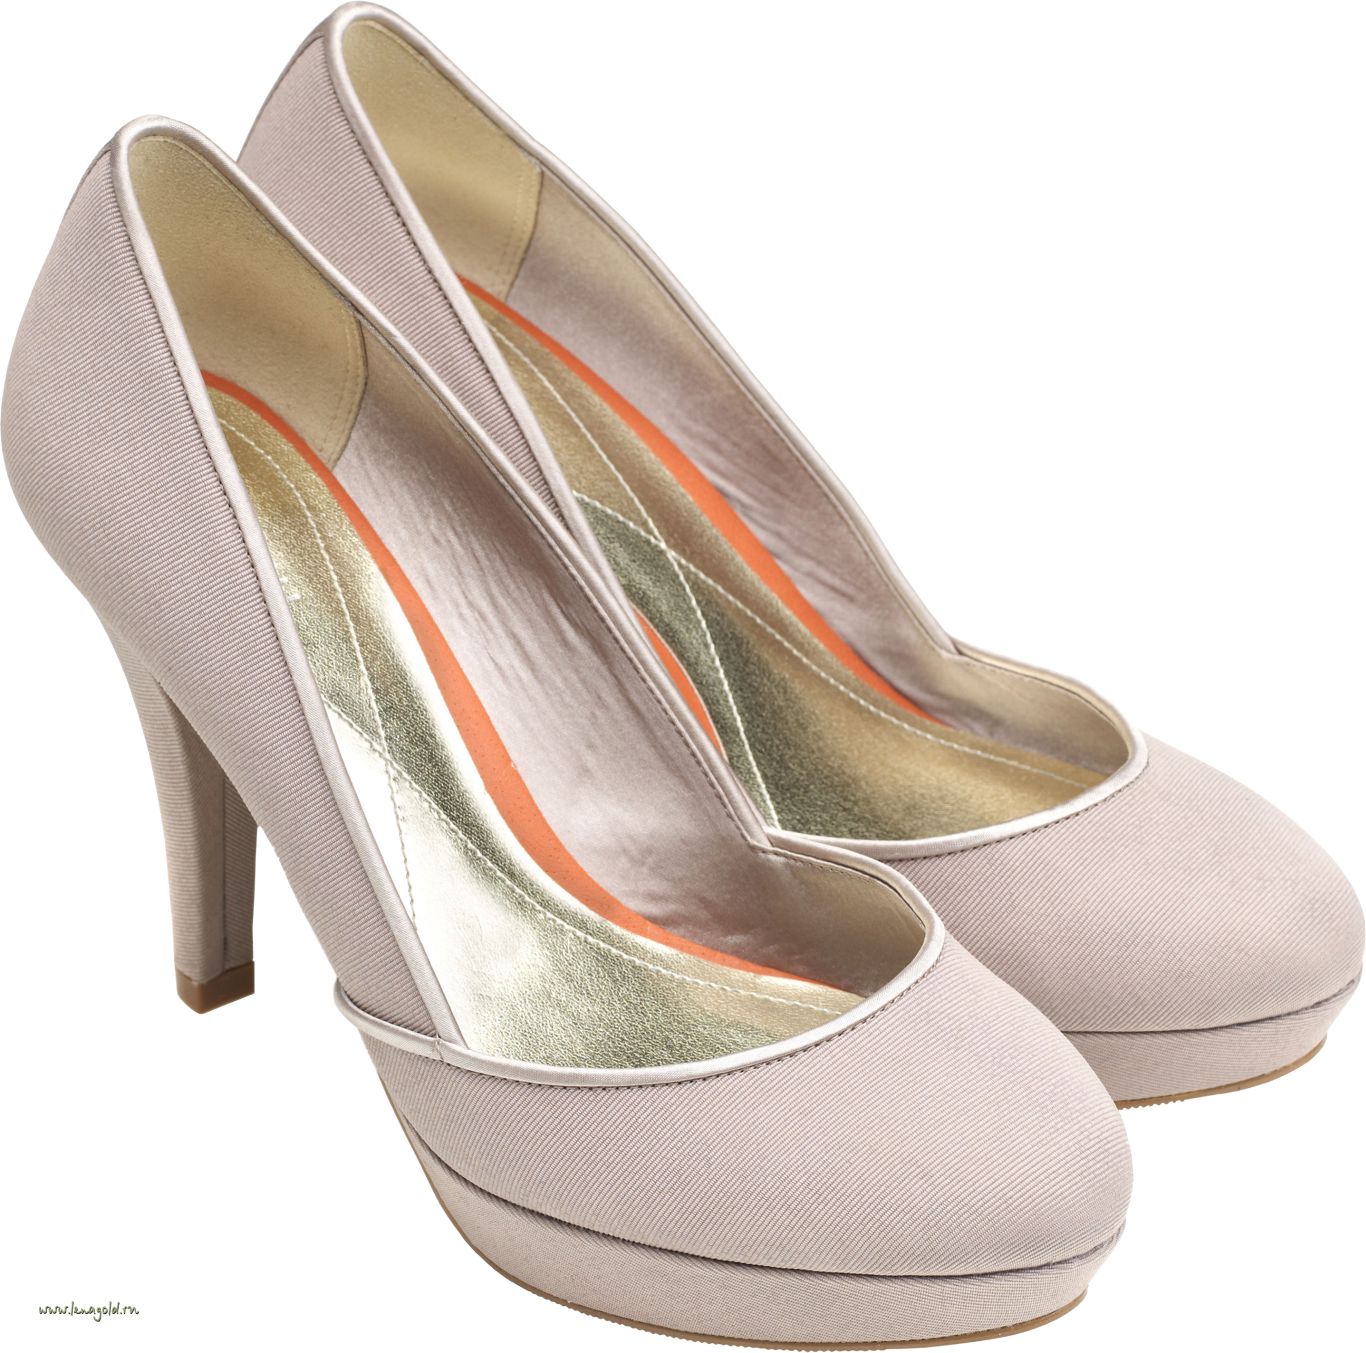 Women shoes PNG image    图片编号:7463